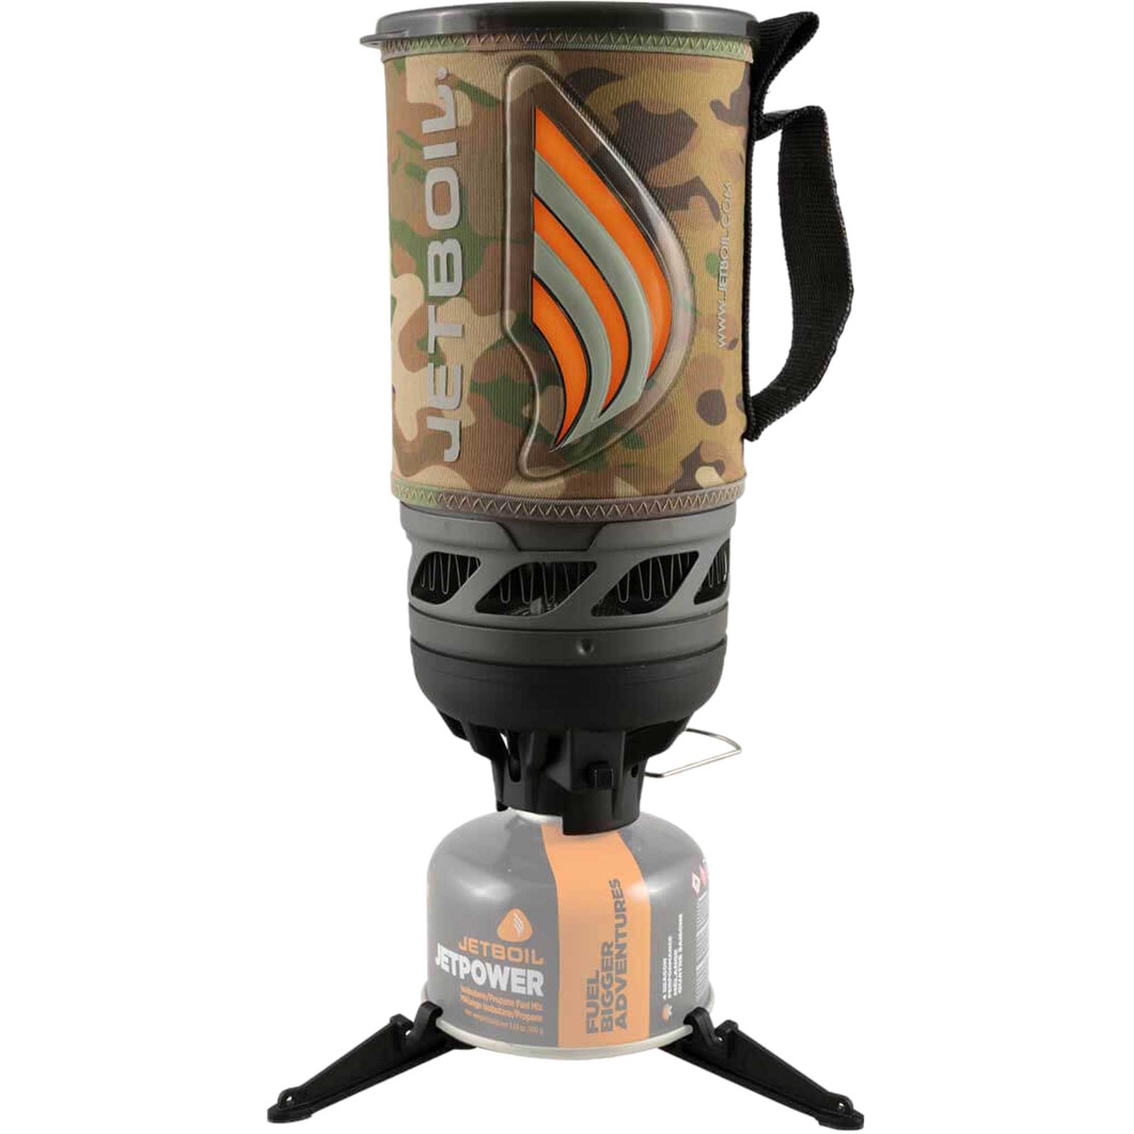 Brigade QM Jetboil Flash Cooking System - Image 2 of 4